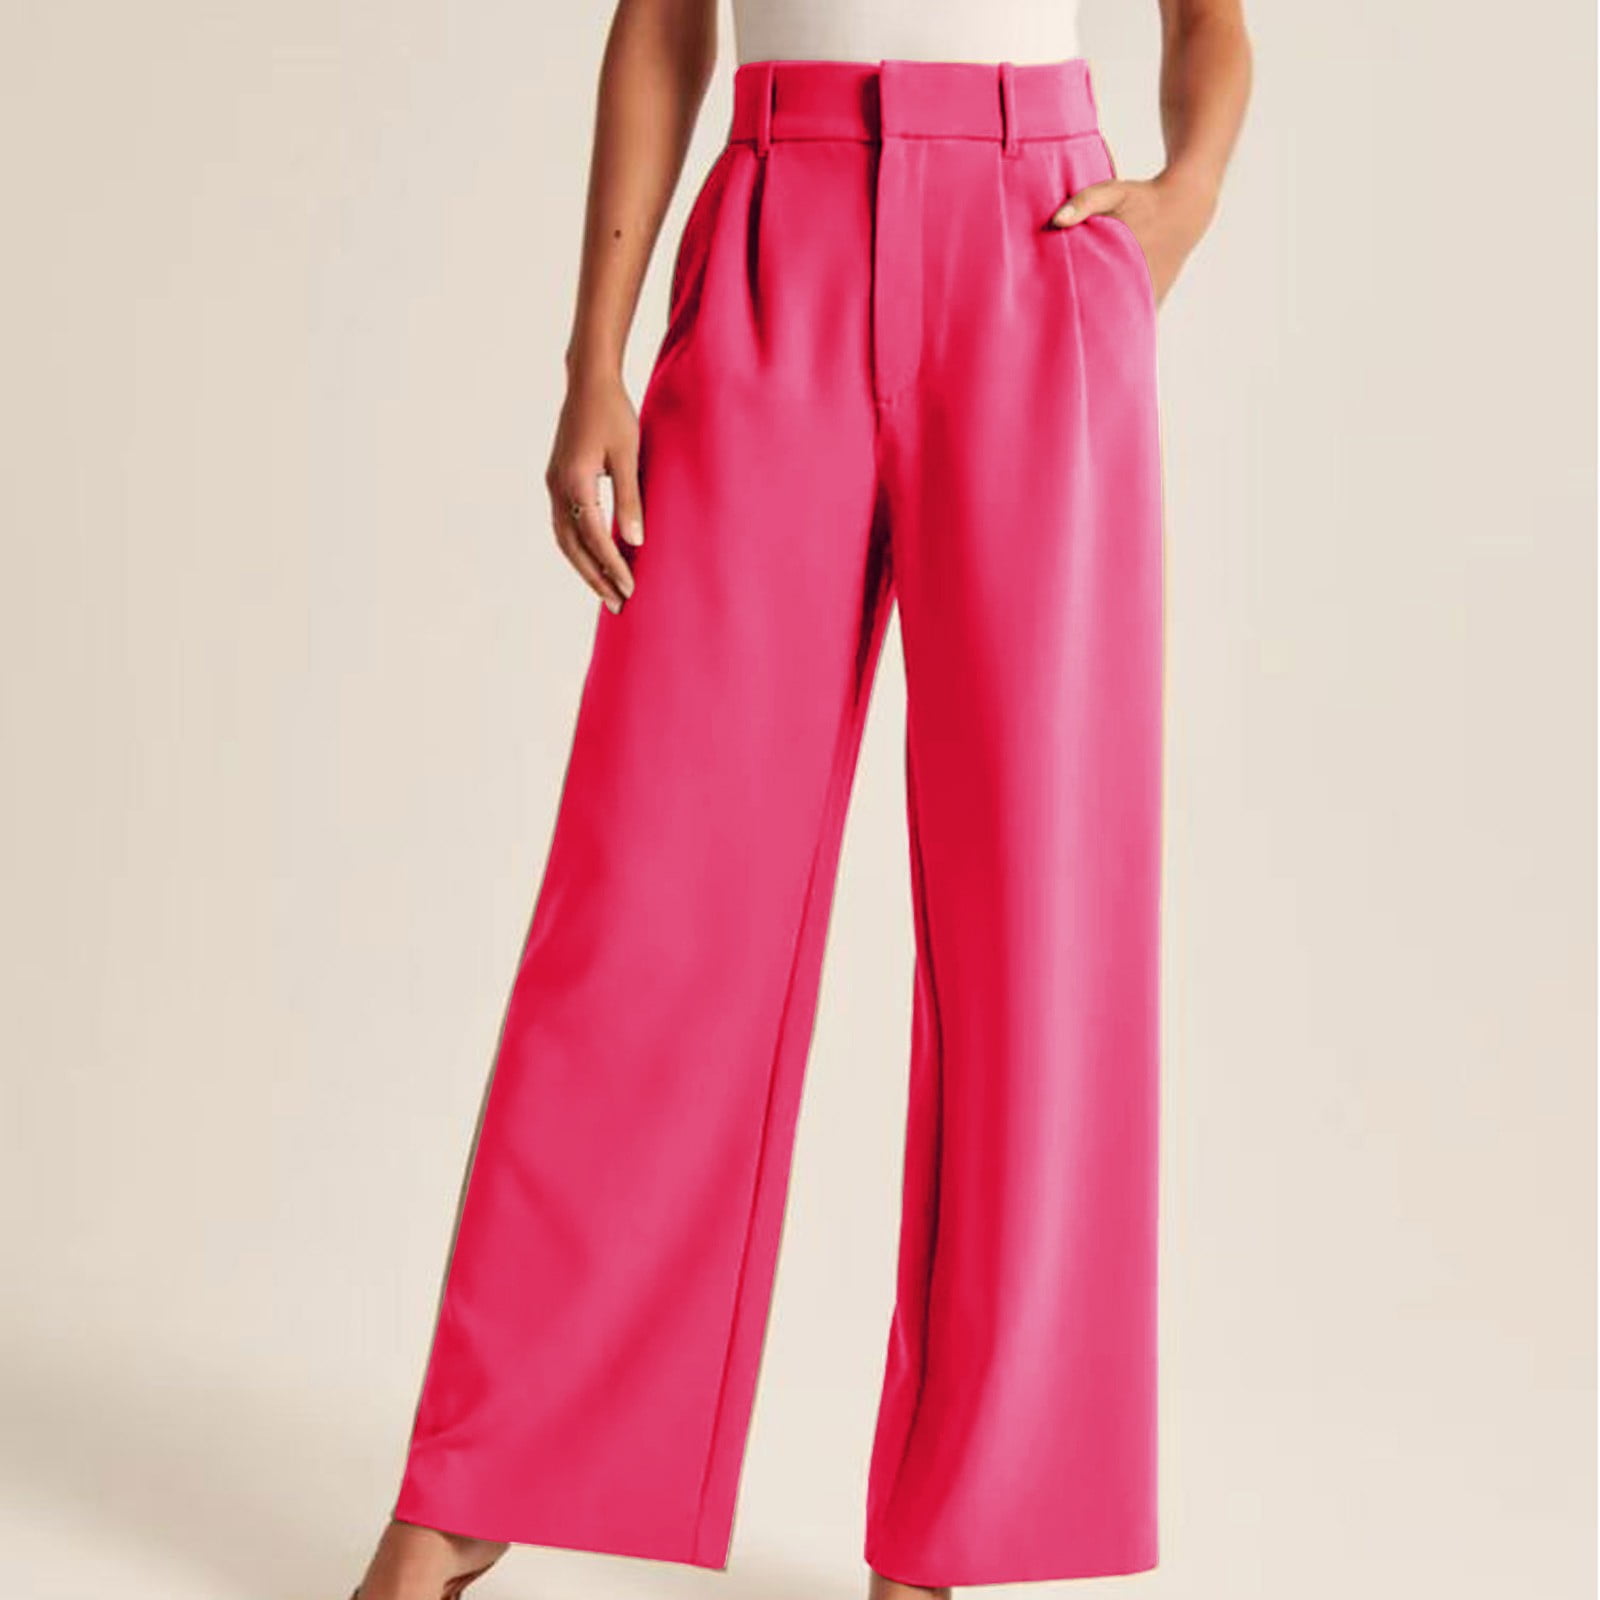 You Can Sit With Us - pink pants (plus size) – Unforgettable Solez